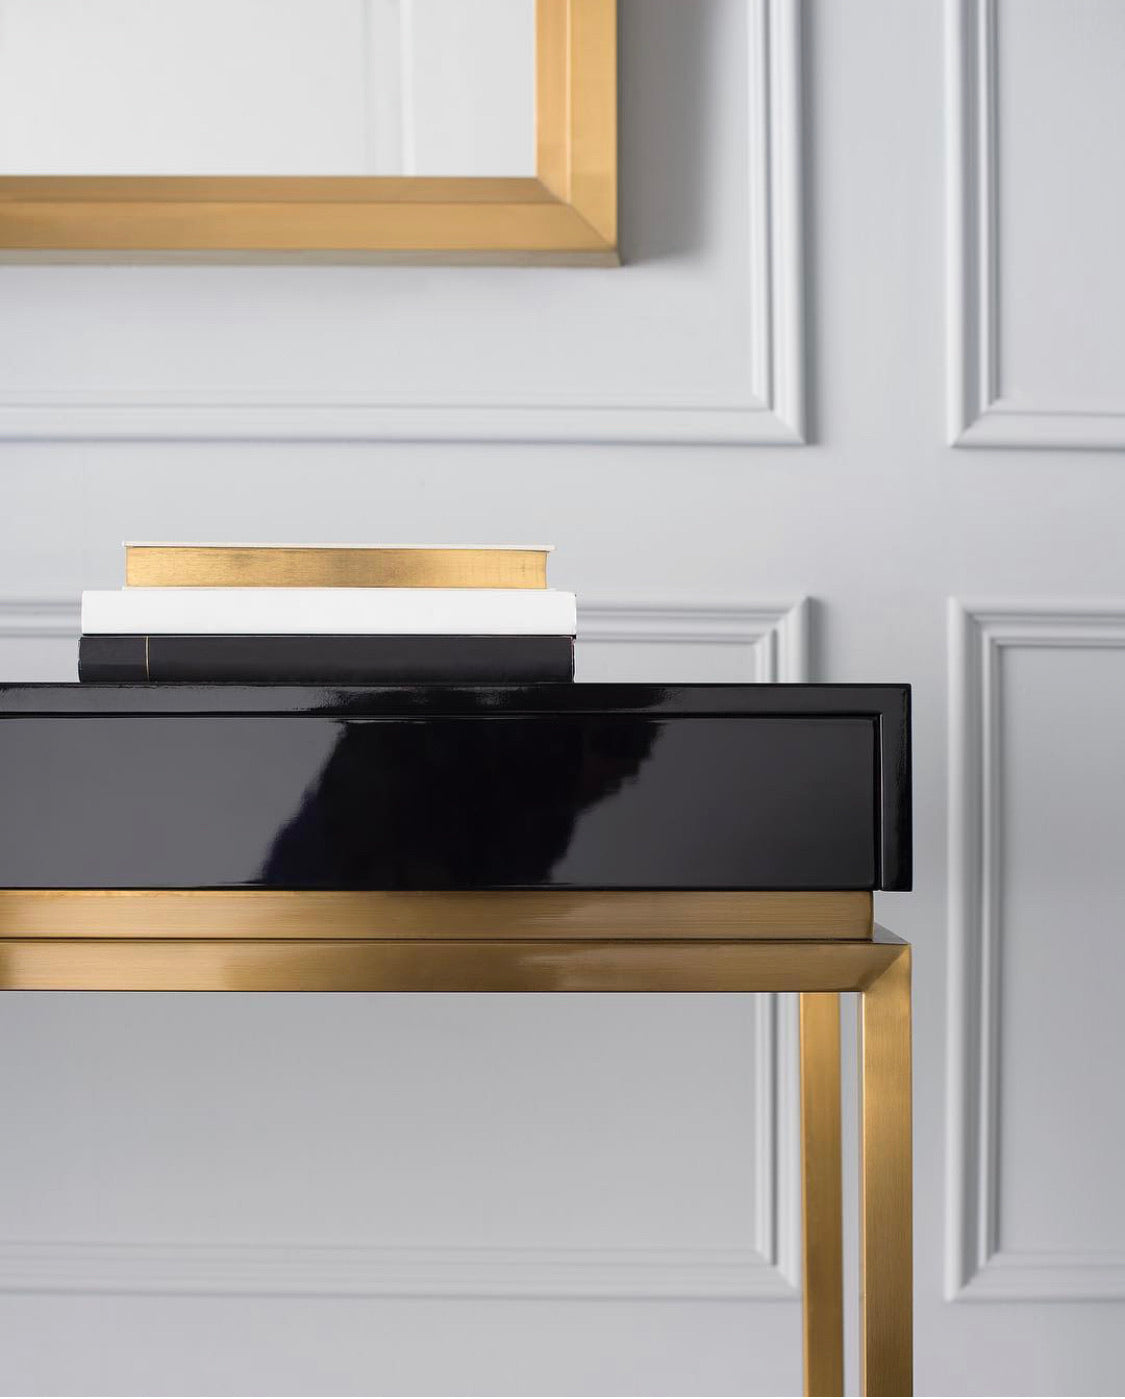 Theodora Black Wood with Brushed Gold Console Table